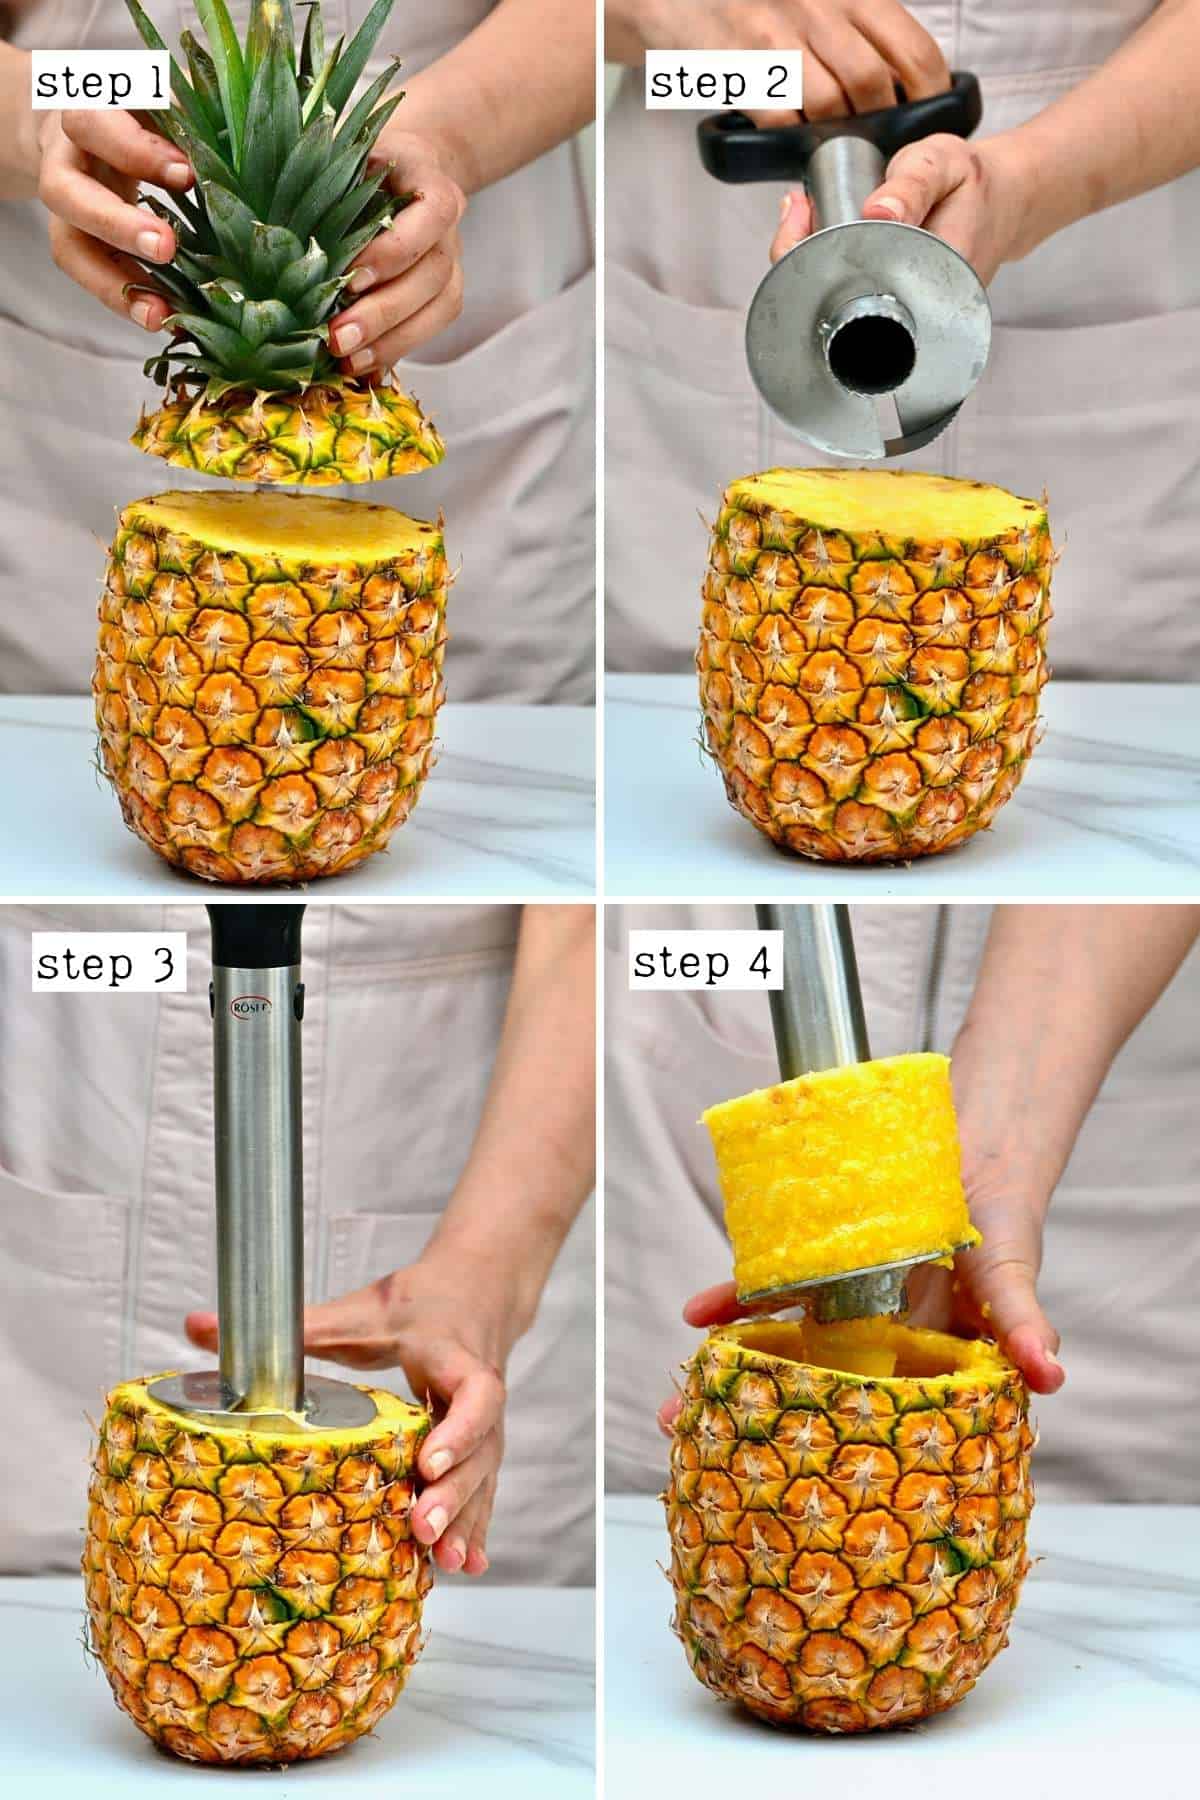 How to Cut a Pineapple (3 different ways!)